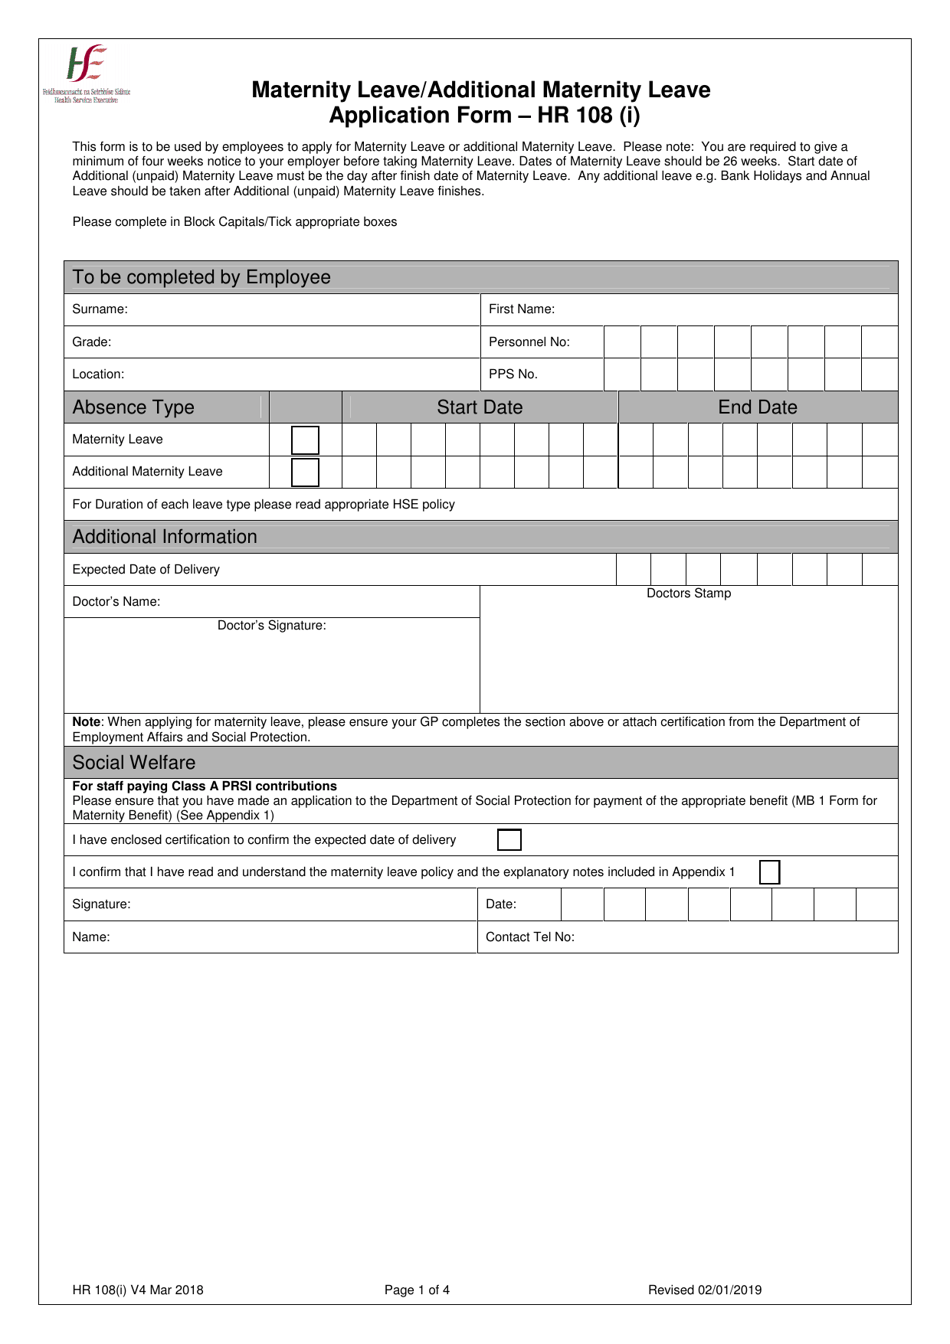 Form HR108 (I) Maternity Leave / Additional Maternity Leave Application Form - Ireland, Page 1